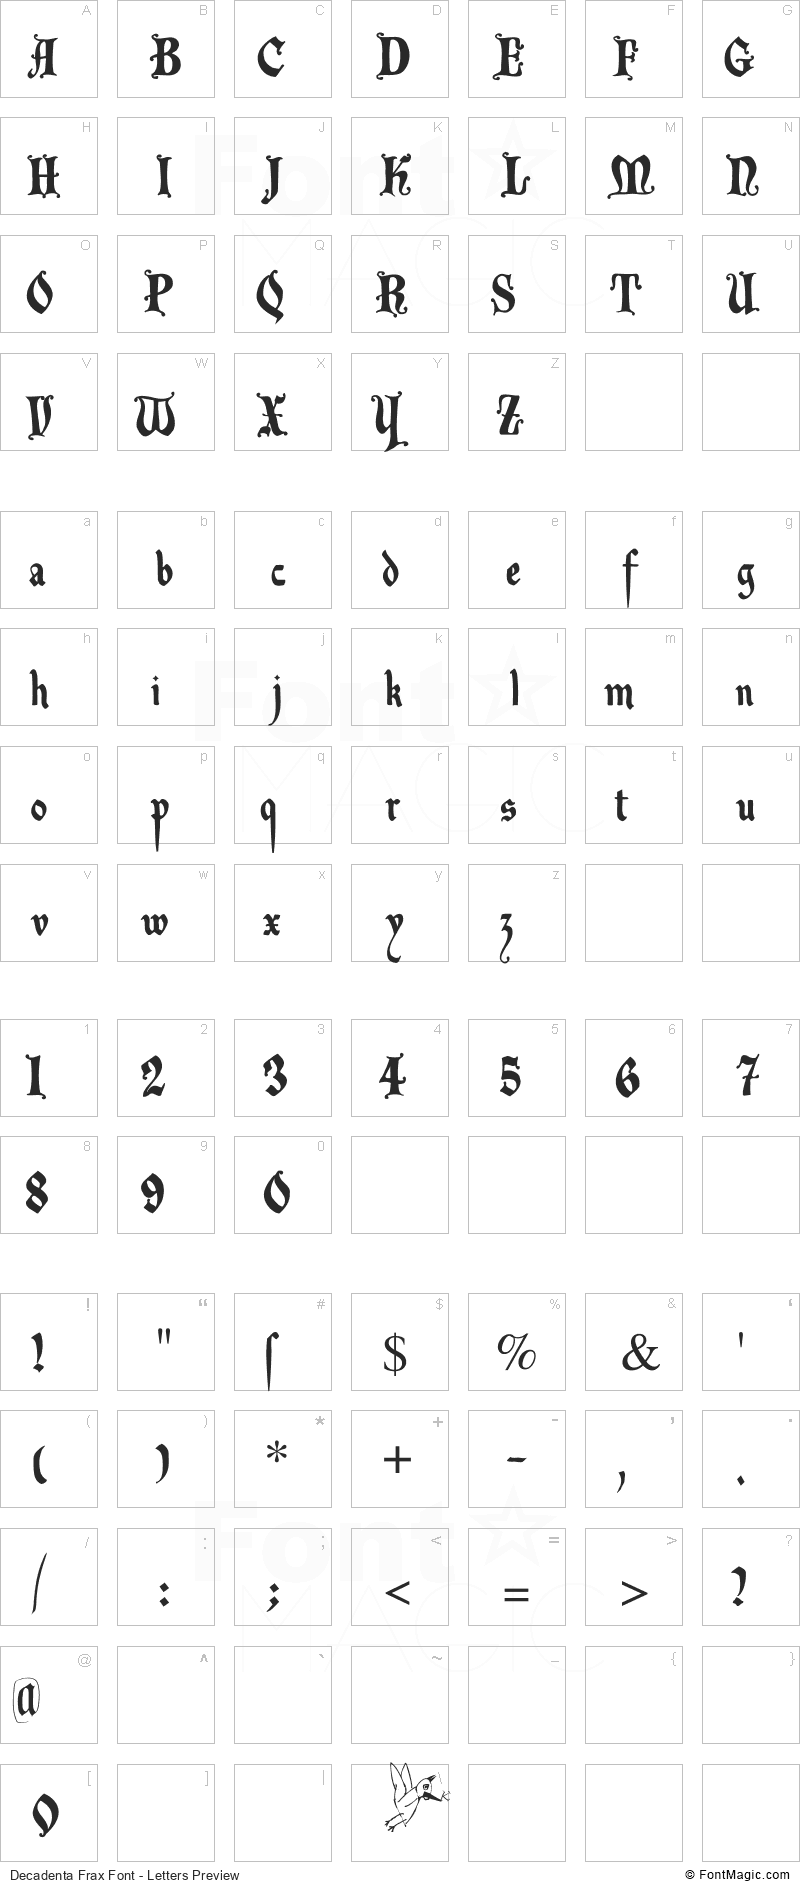 Decadenta Frax Font - All Latters Preview Chart